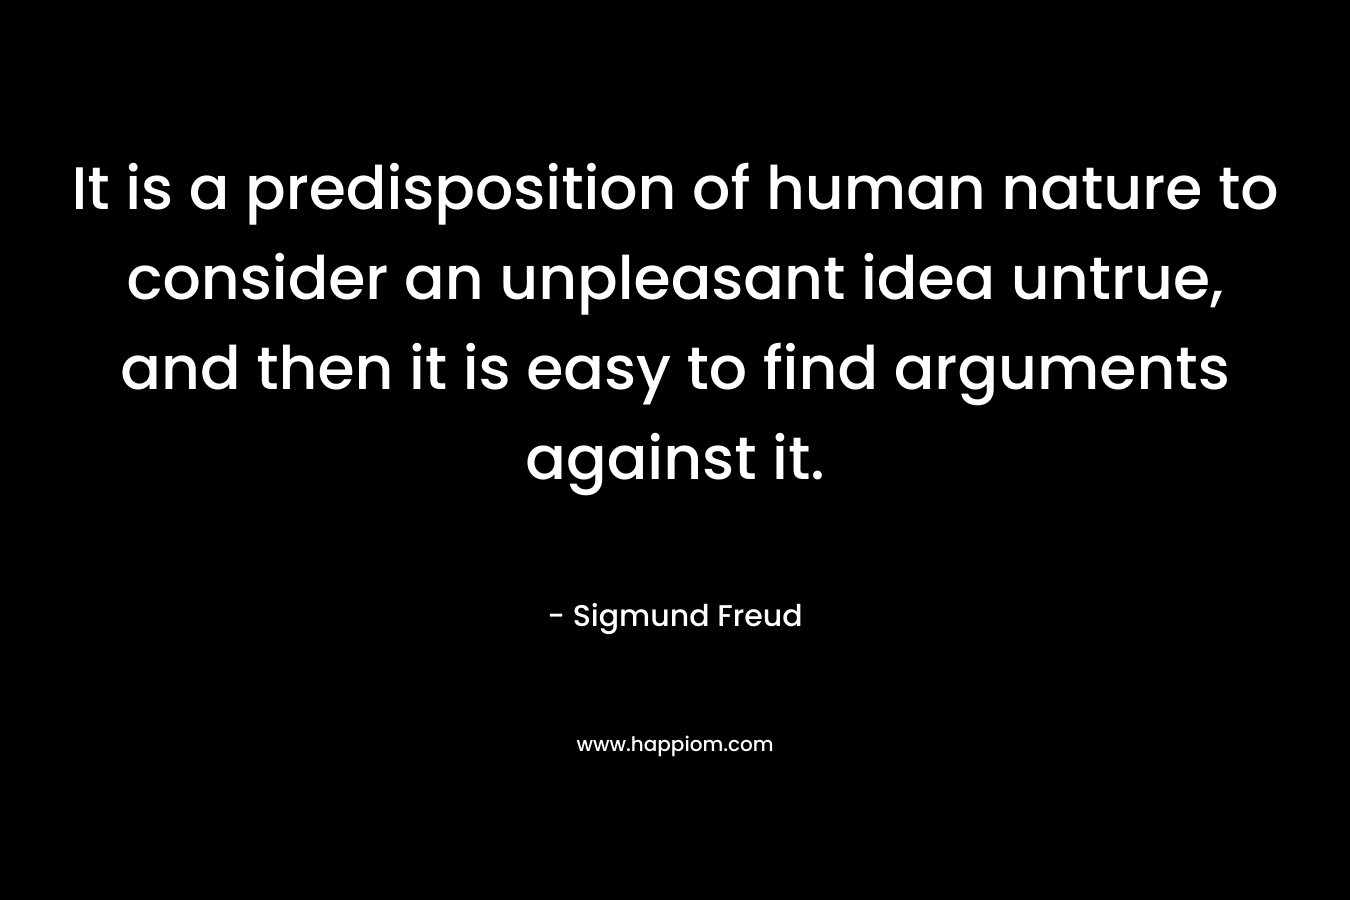 It is a predisposition of human nature to consider an unpleasant idea untrue, and then it is easy to find arguments against it.